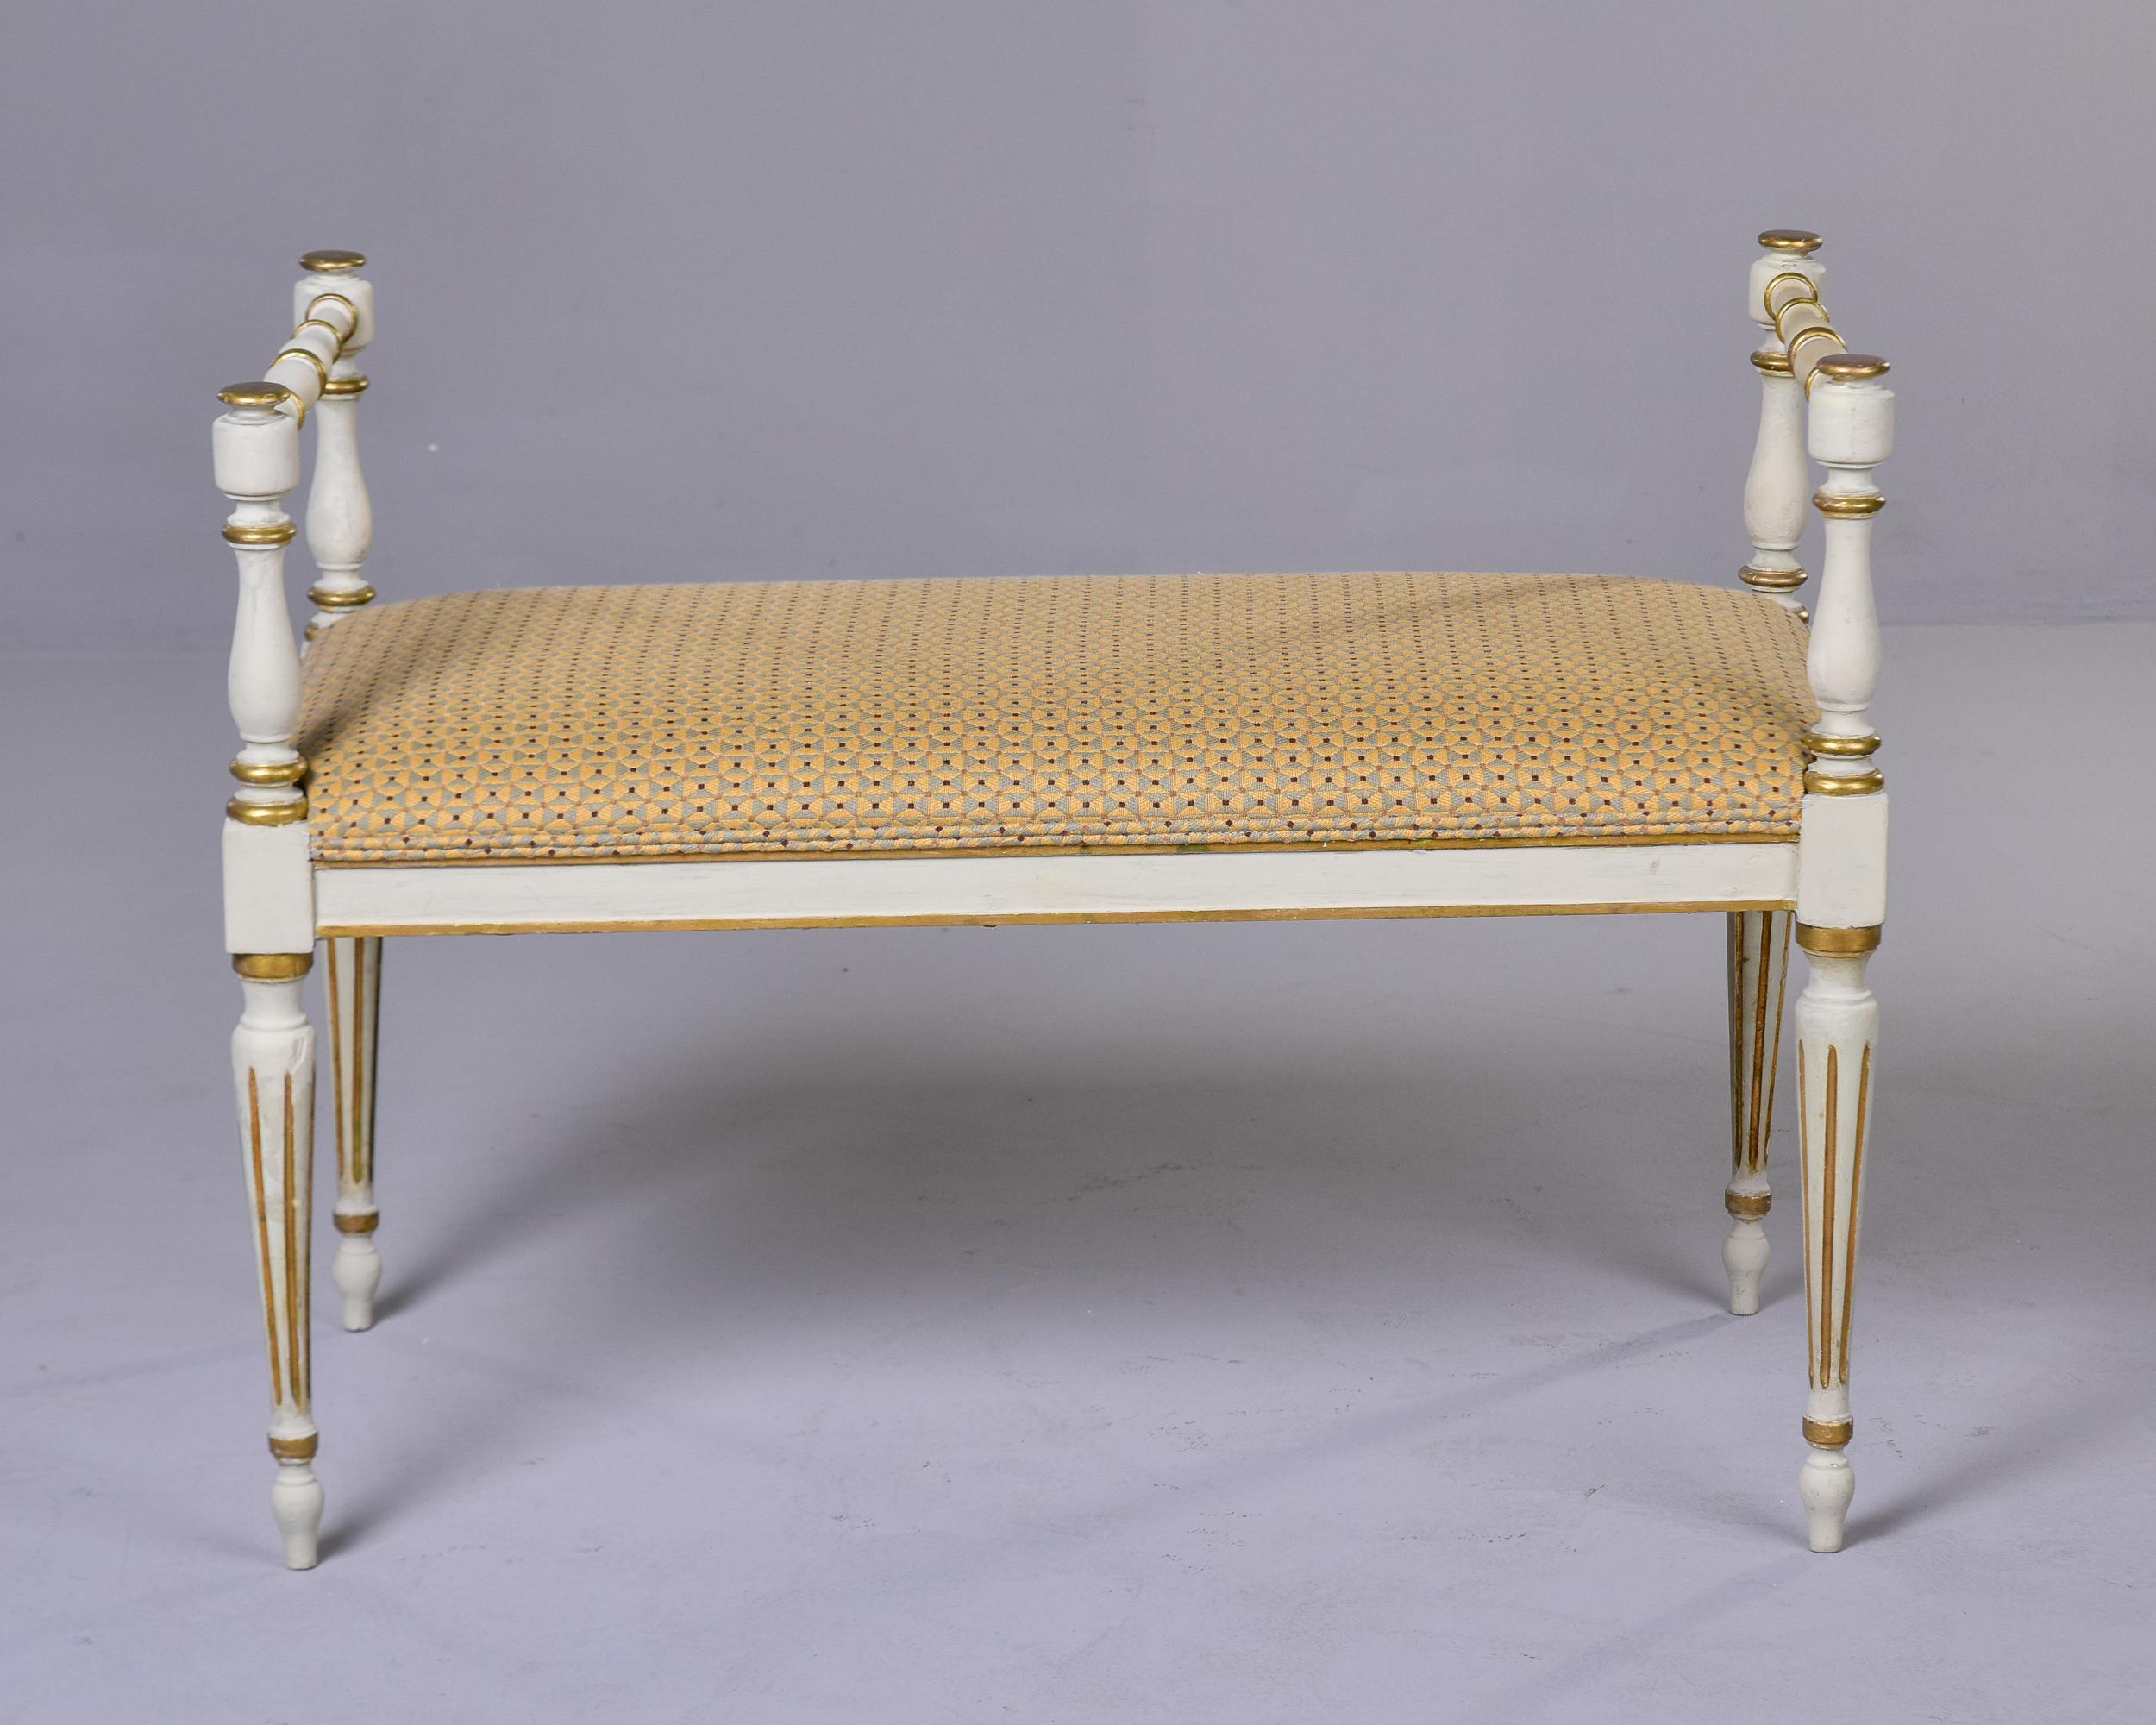 Early 20th C French Painted and Upholstered Bench with Side Arms  In Good Condition For Sale In Troy, MI